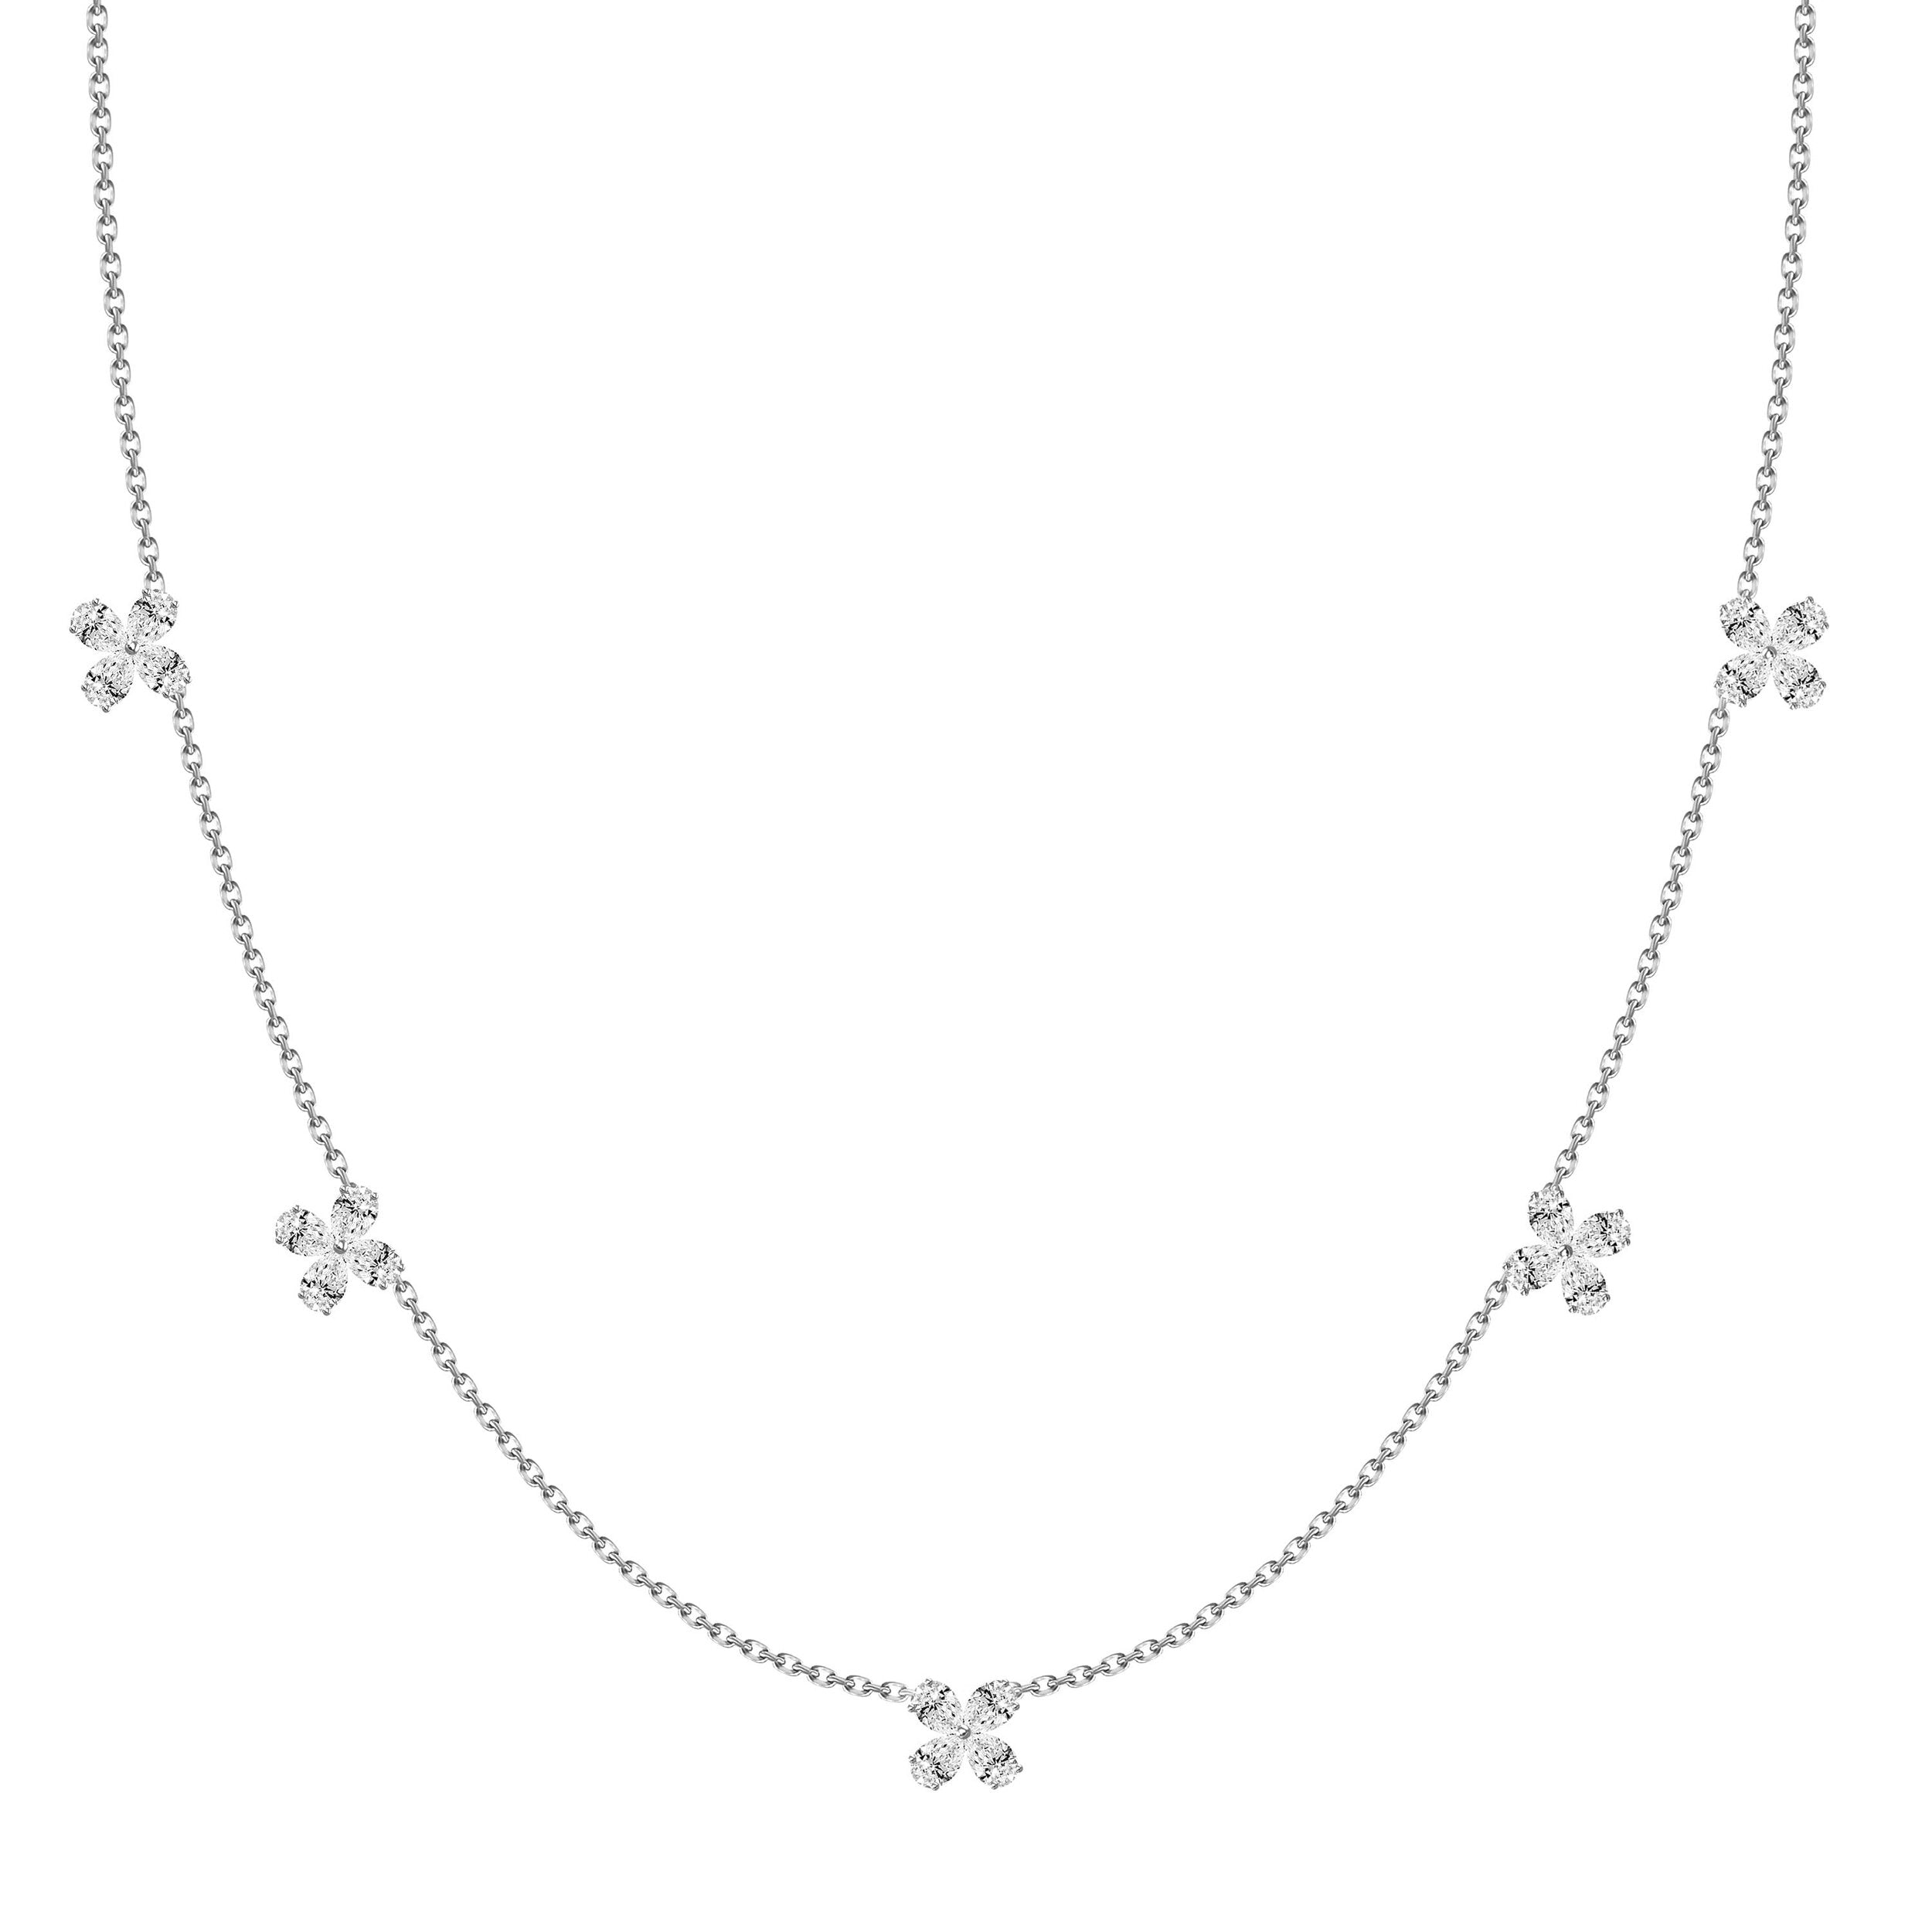 Floating Water Lily Diamond Necklace